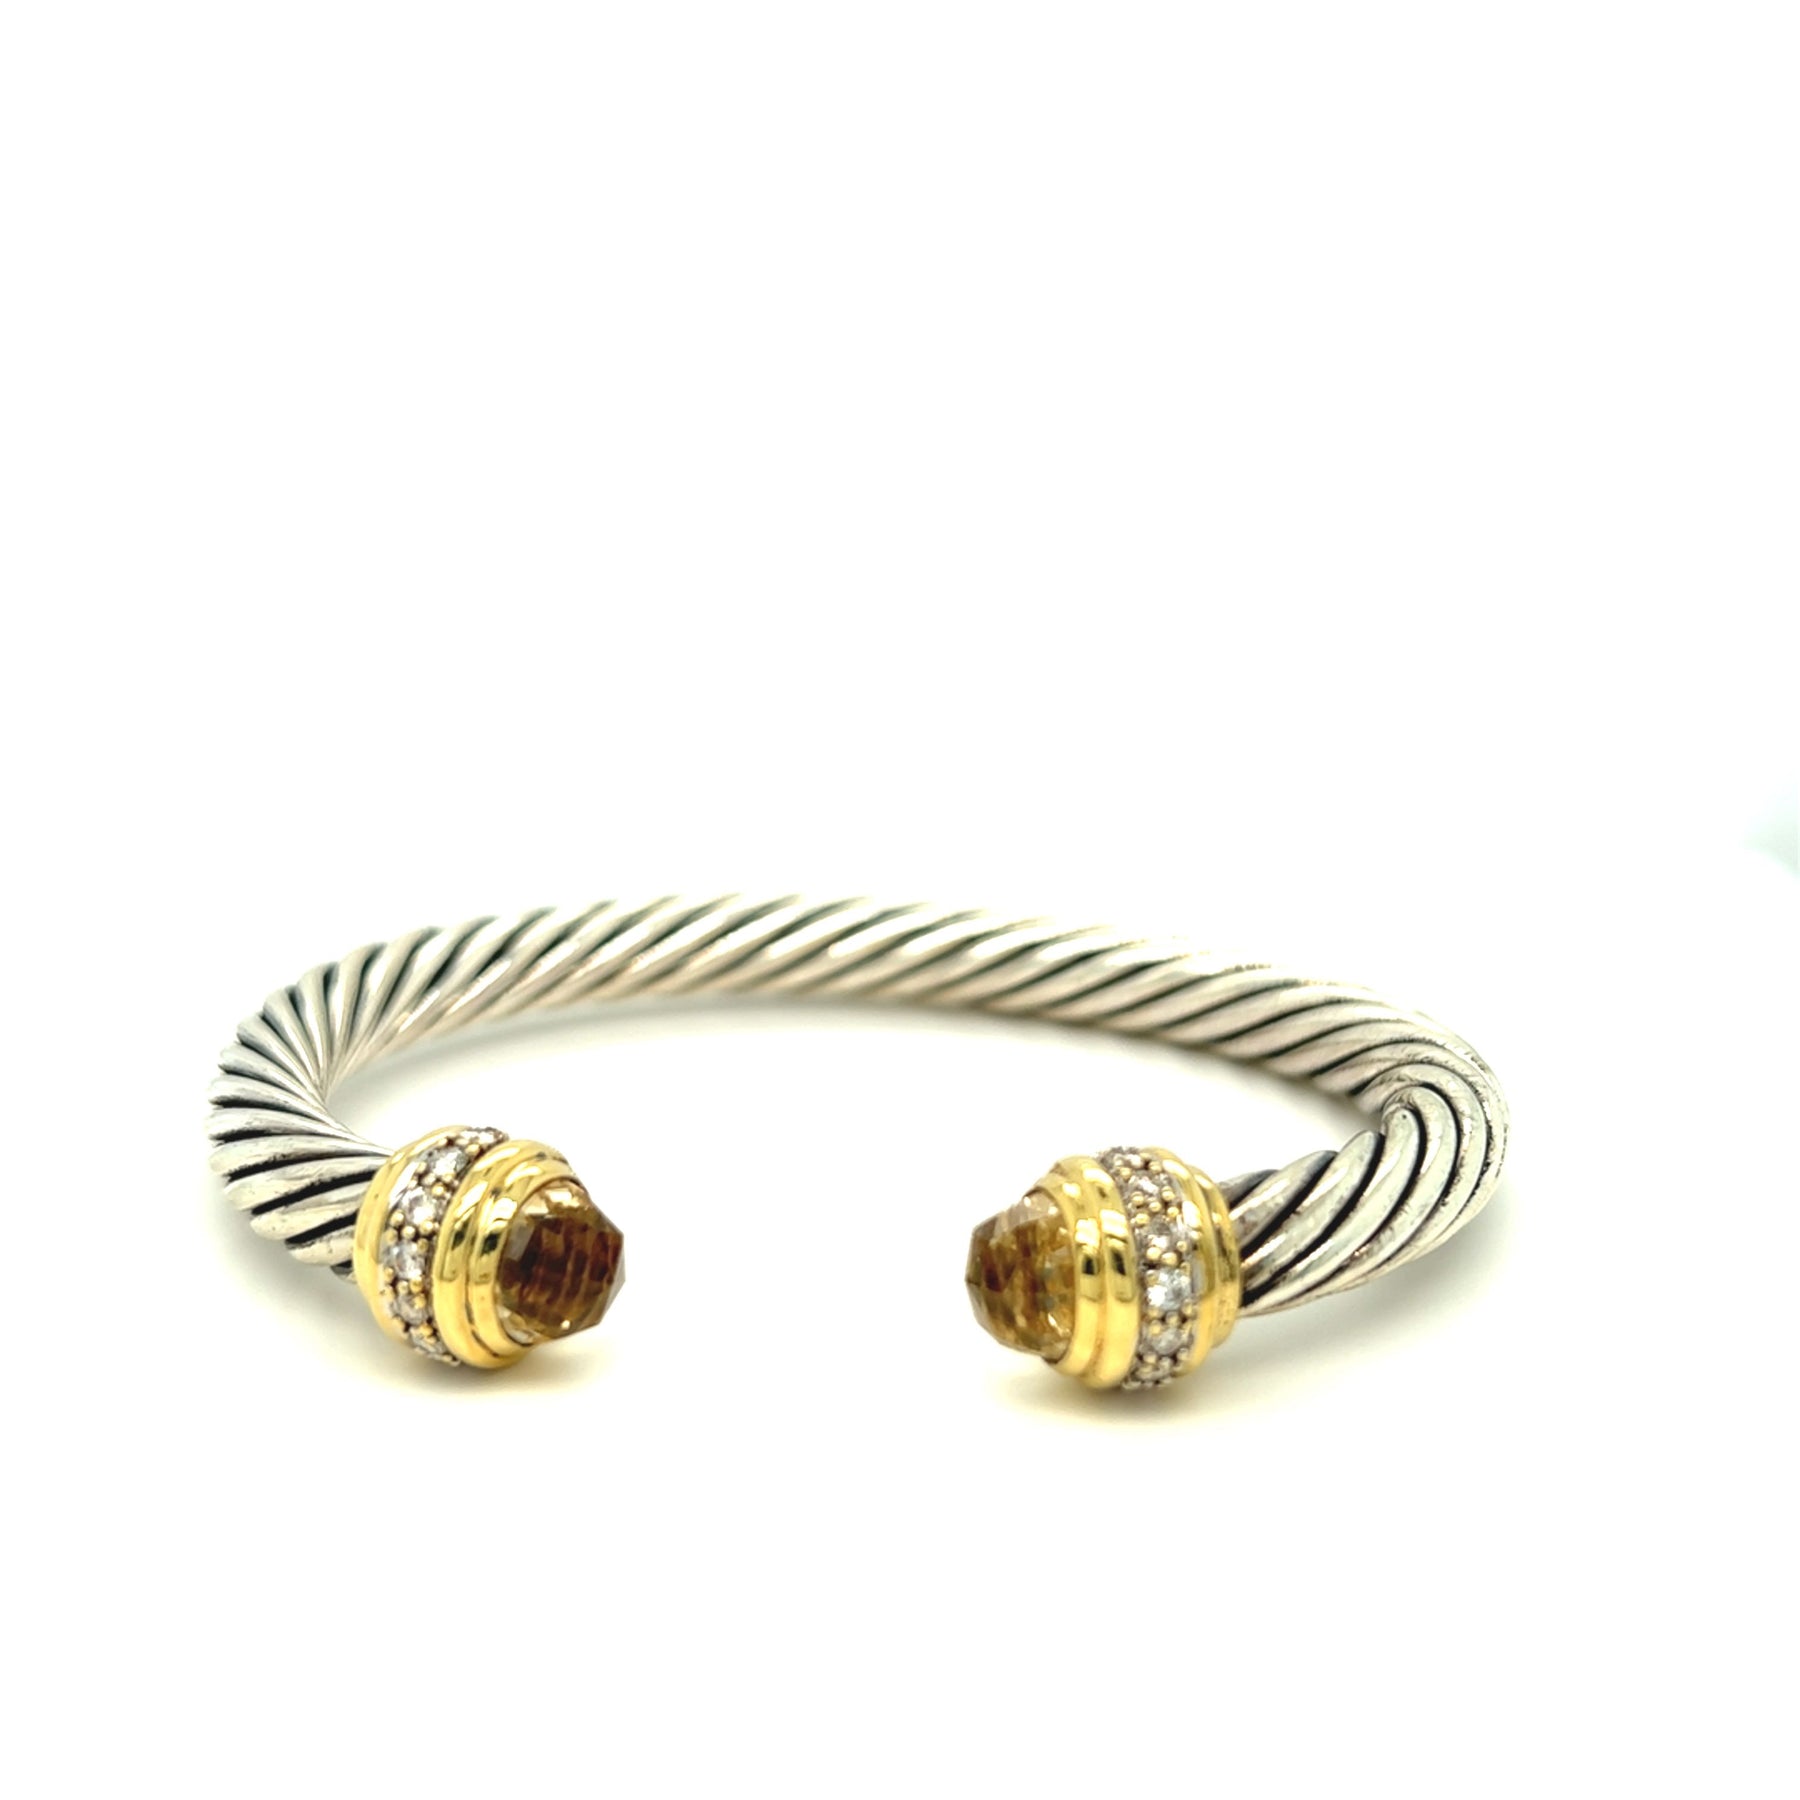 David Yurman Citrine Cuff and – Diamond Bangle Bracelet Are and Cable Forever Gems Silver